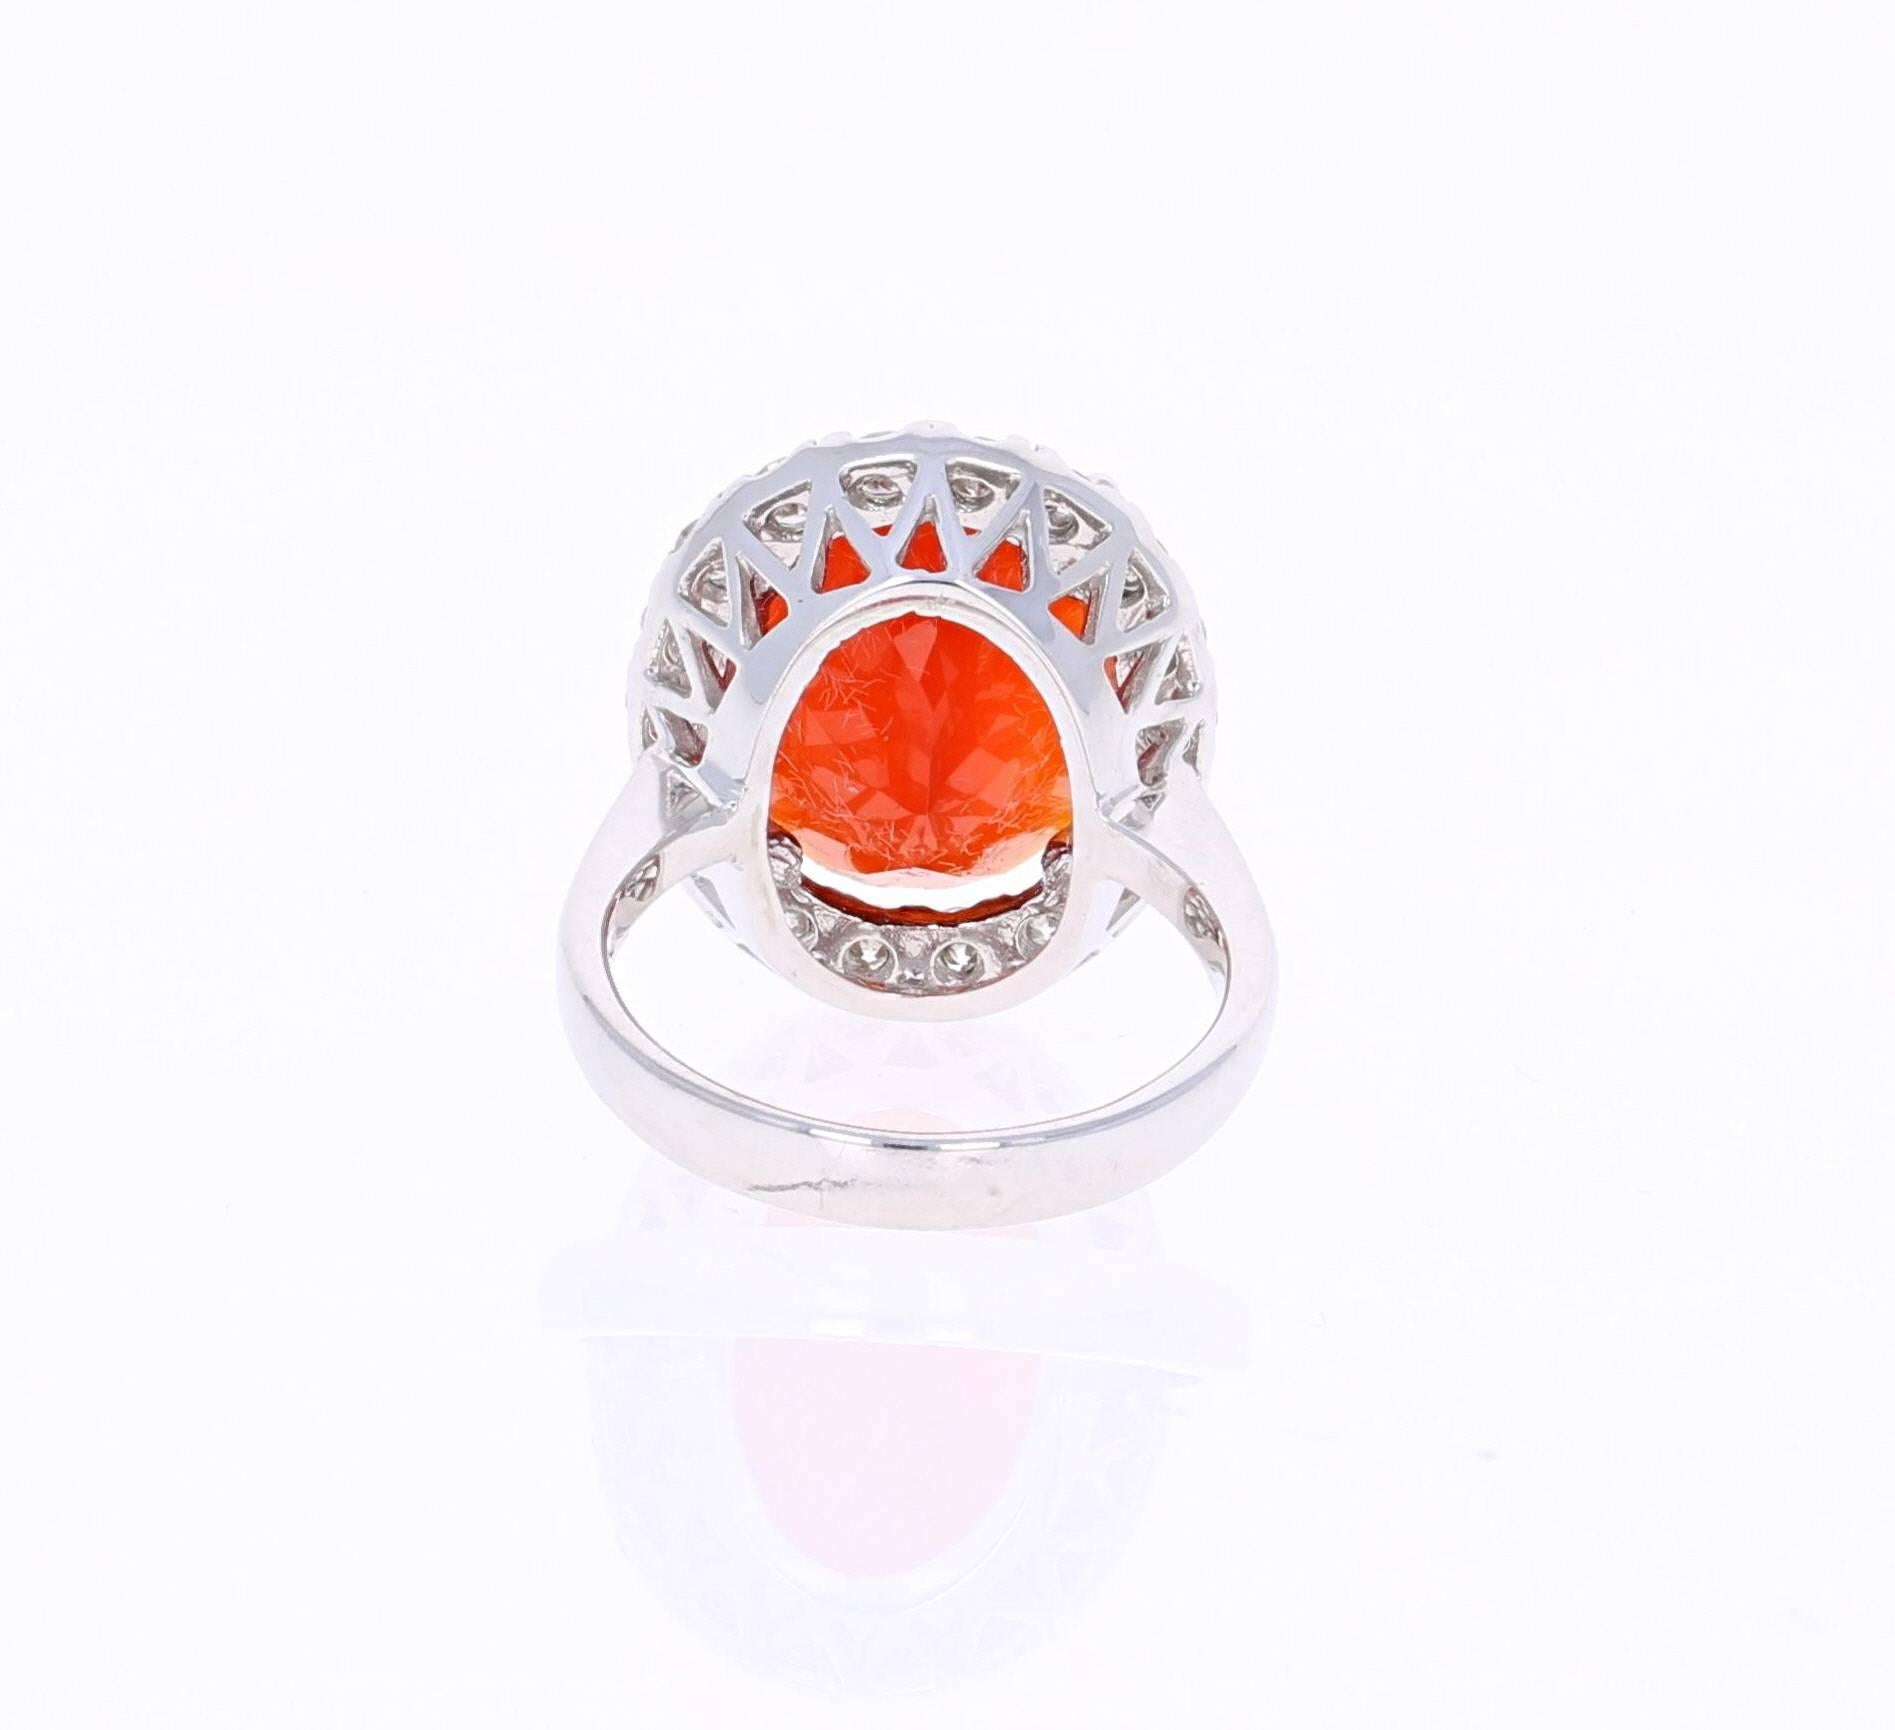 Oval Cut 6.86 Carat Fire Opal Diamond Cocktail White Gold Ring